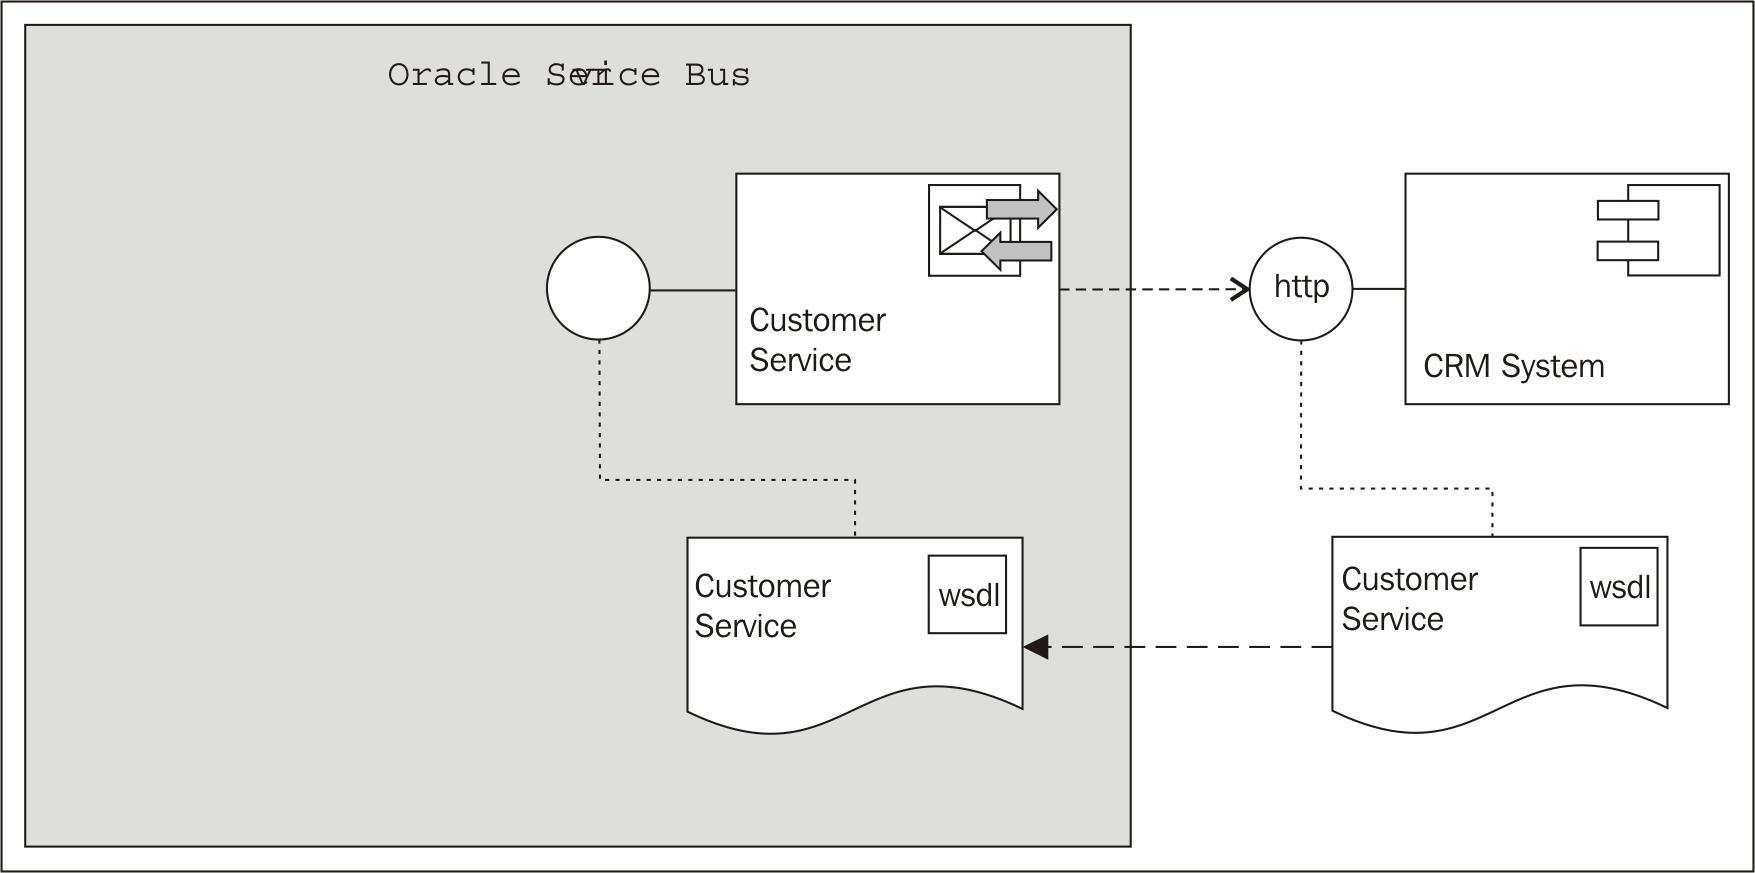 Creating a business service to call an external SOAP-based web service